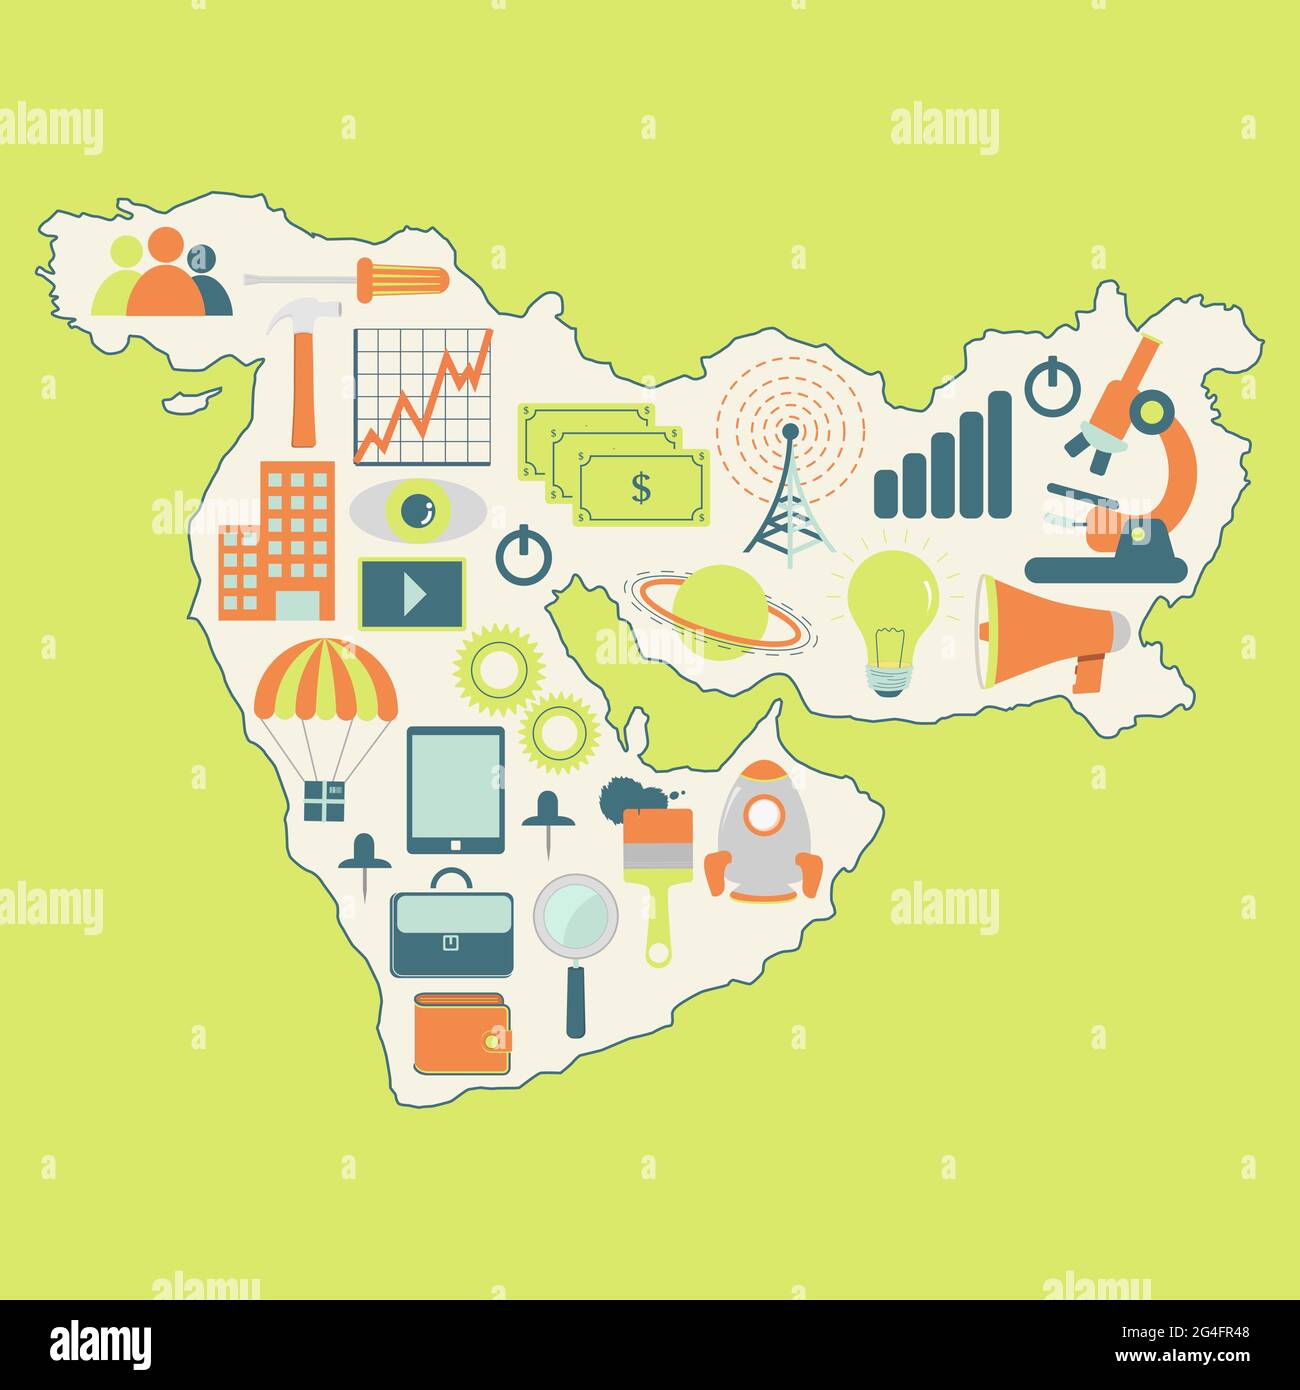 Contour map of Middle East with icons of technology, business, science, communication Stock Vector